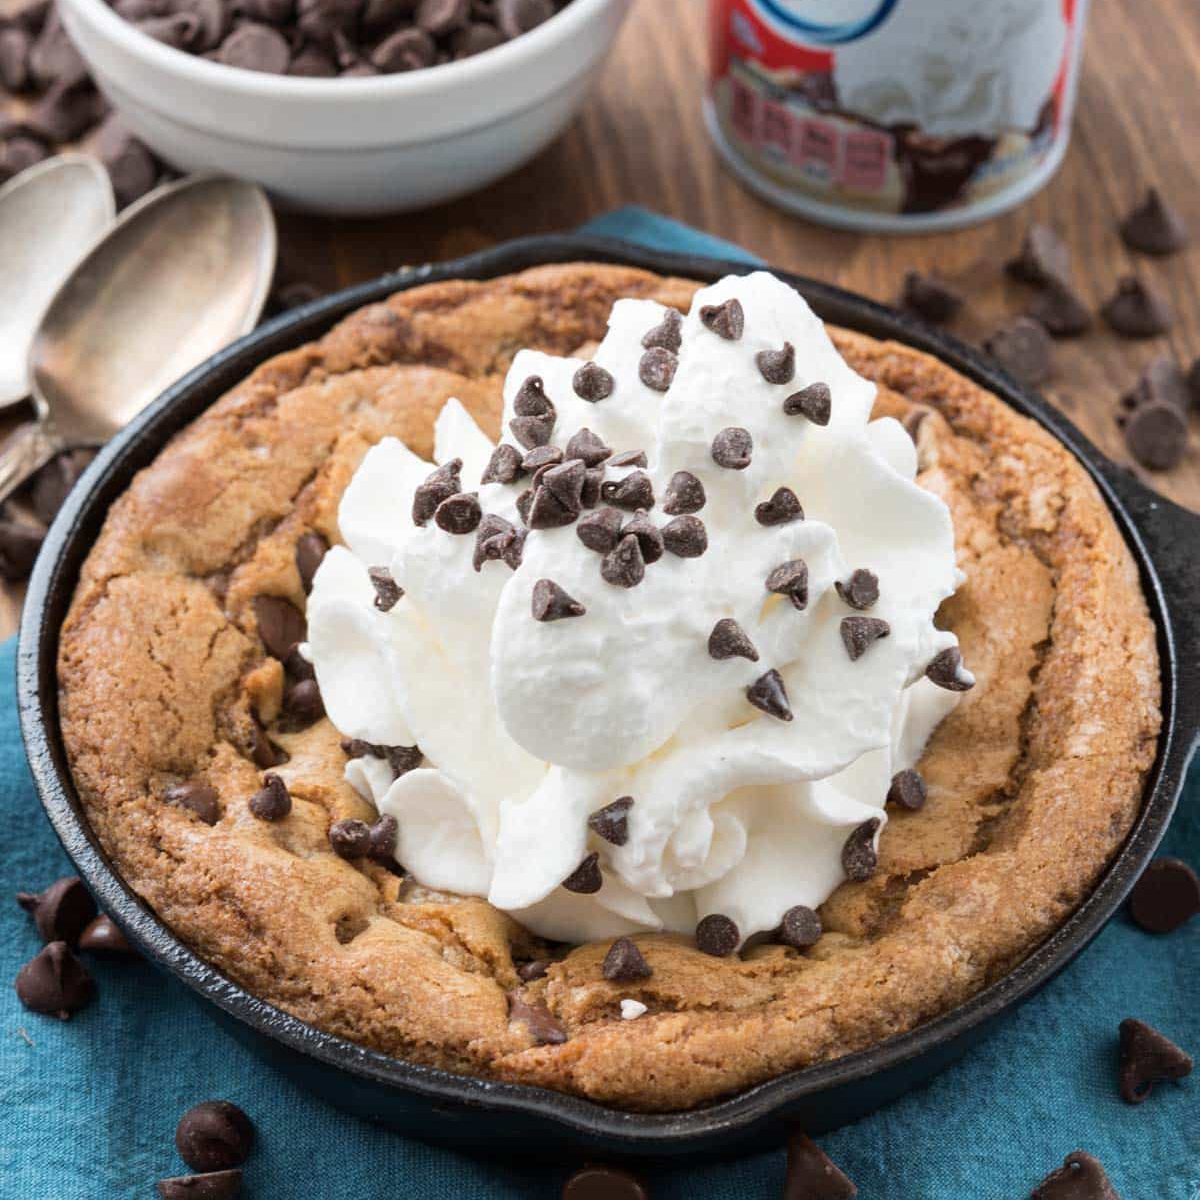 https://www.tasteofhome.com/wp-content/uploads/2019/01/Skillet-Chocolate-Chip-Cookie-4-of-14.jpg?fit=700%2C700